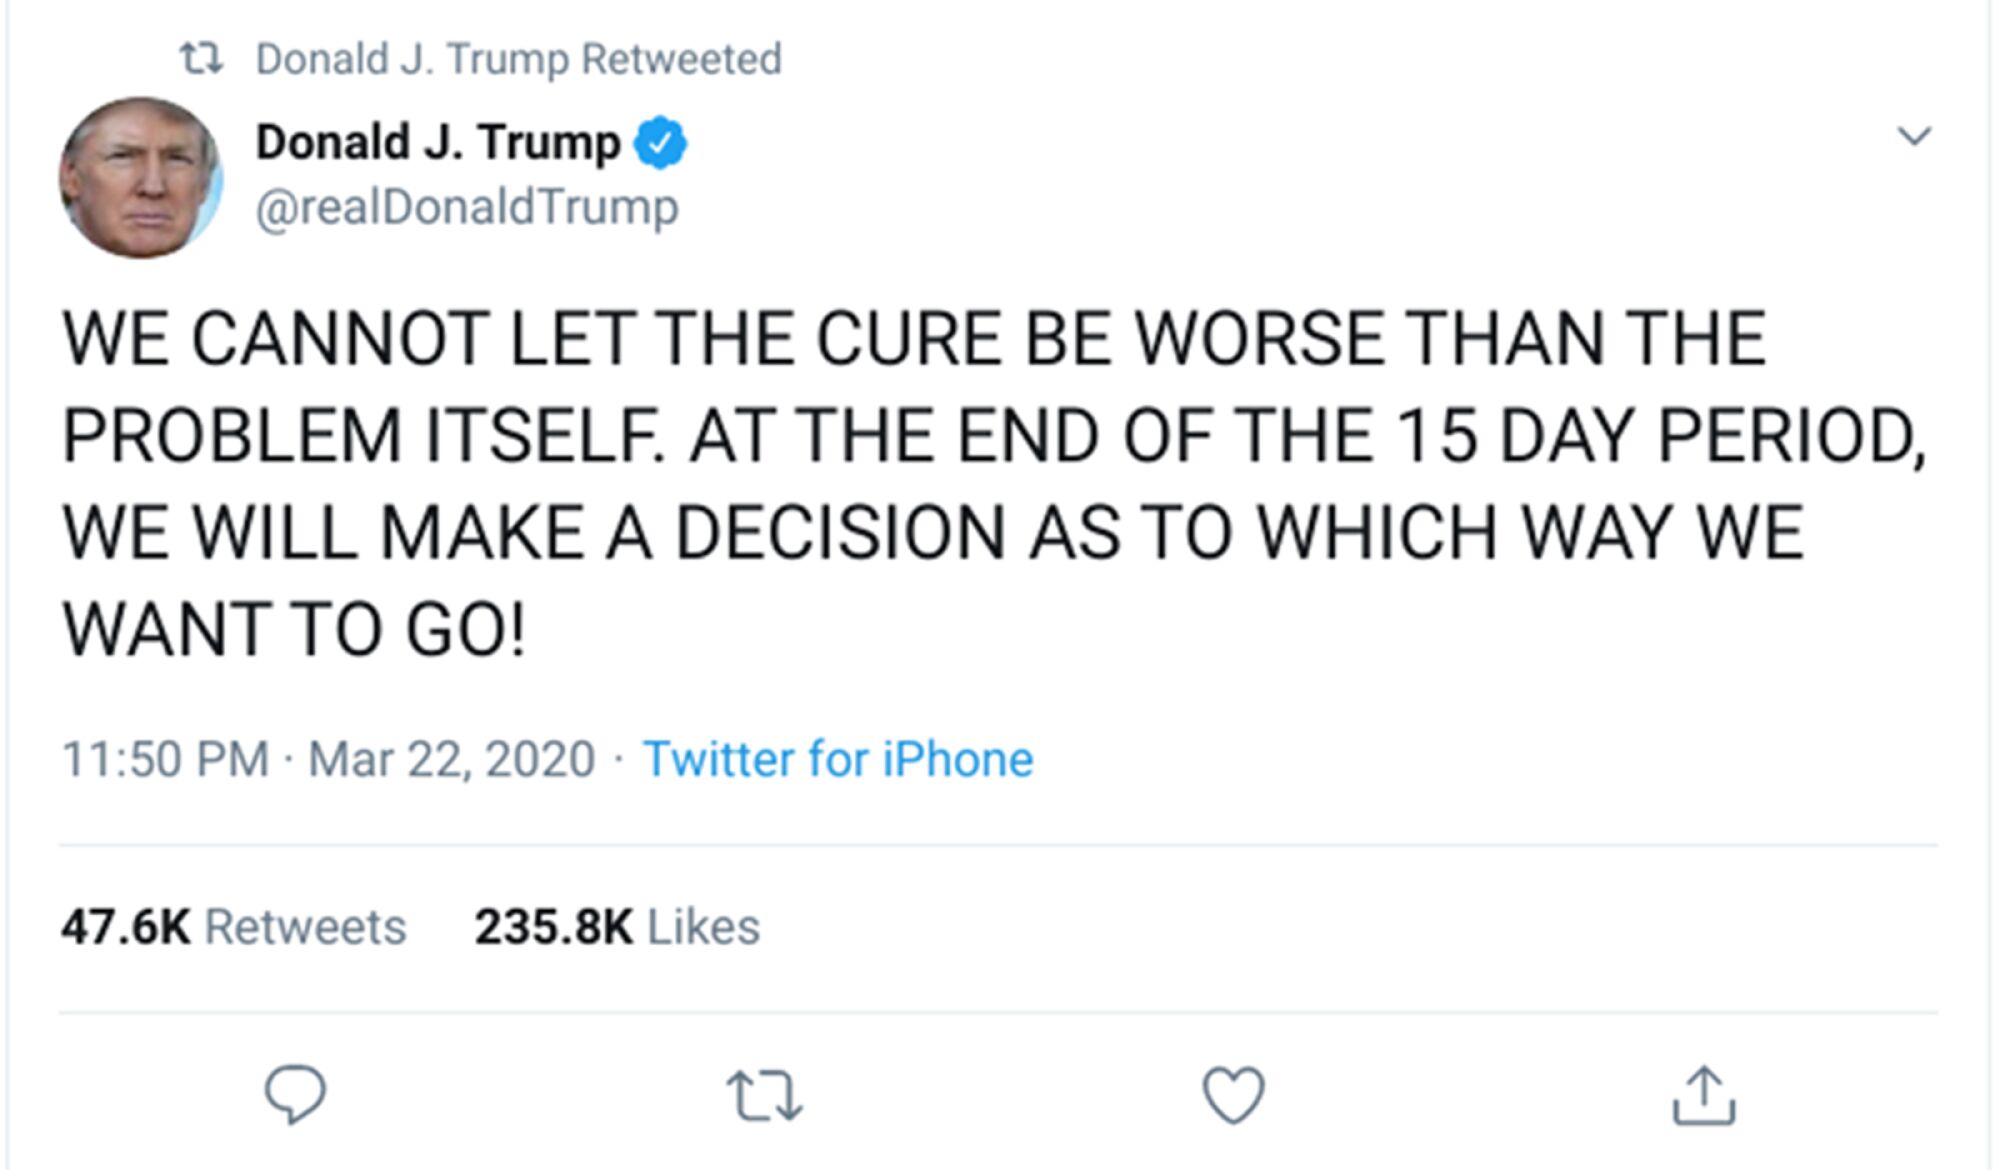 Trump tweets about the response to the coronavirus crisis.